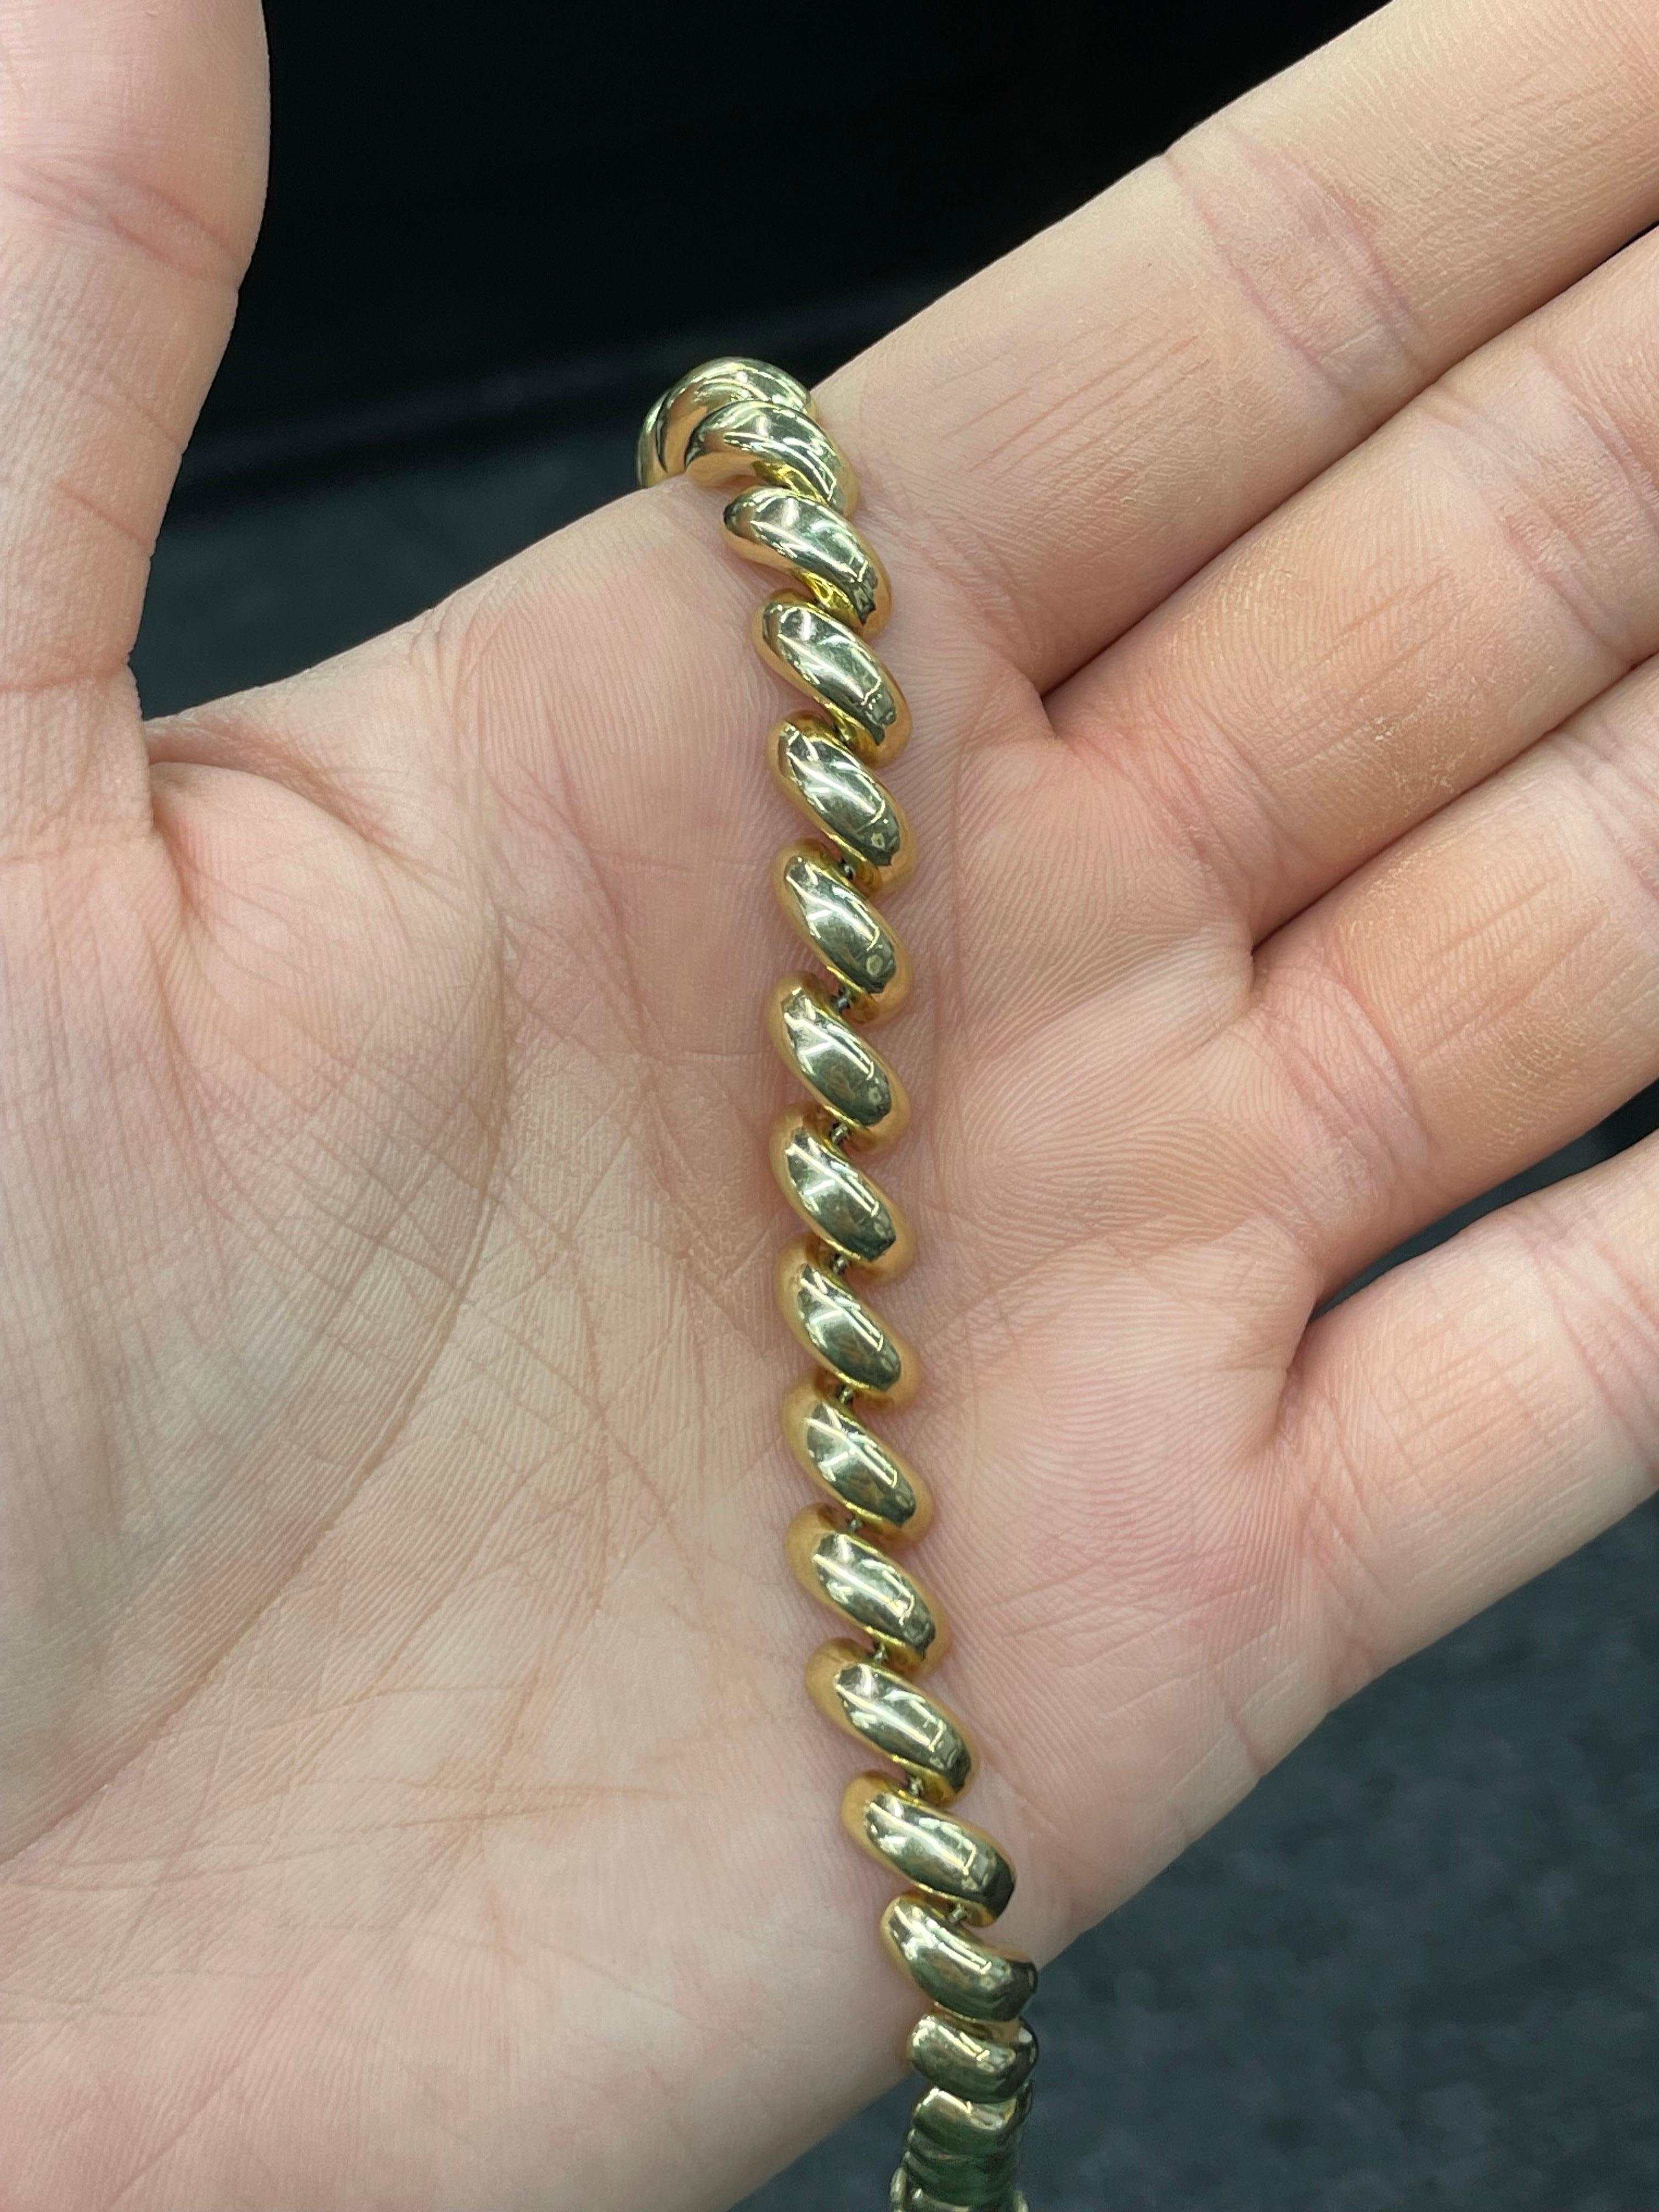 14k Yellow Gold San Marco Link Bracelet 15.34 Grams Made in Italy 2